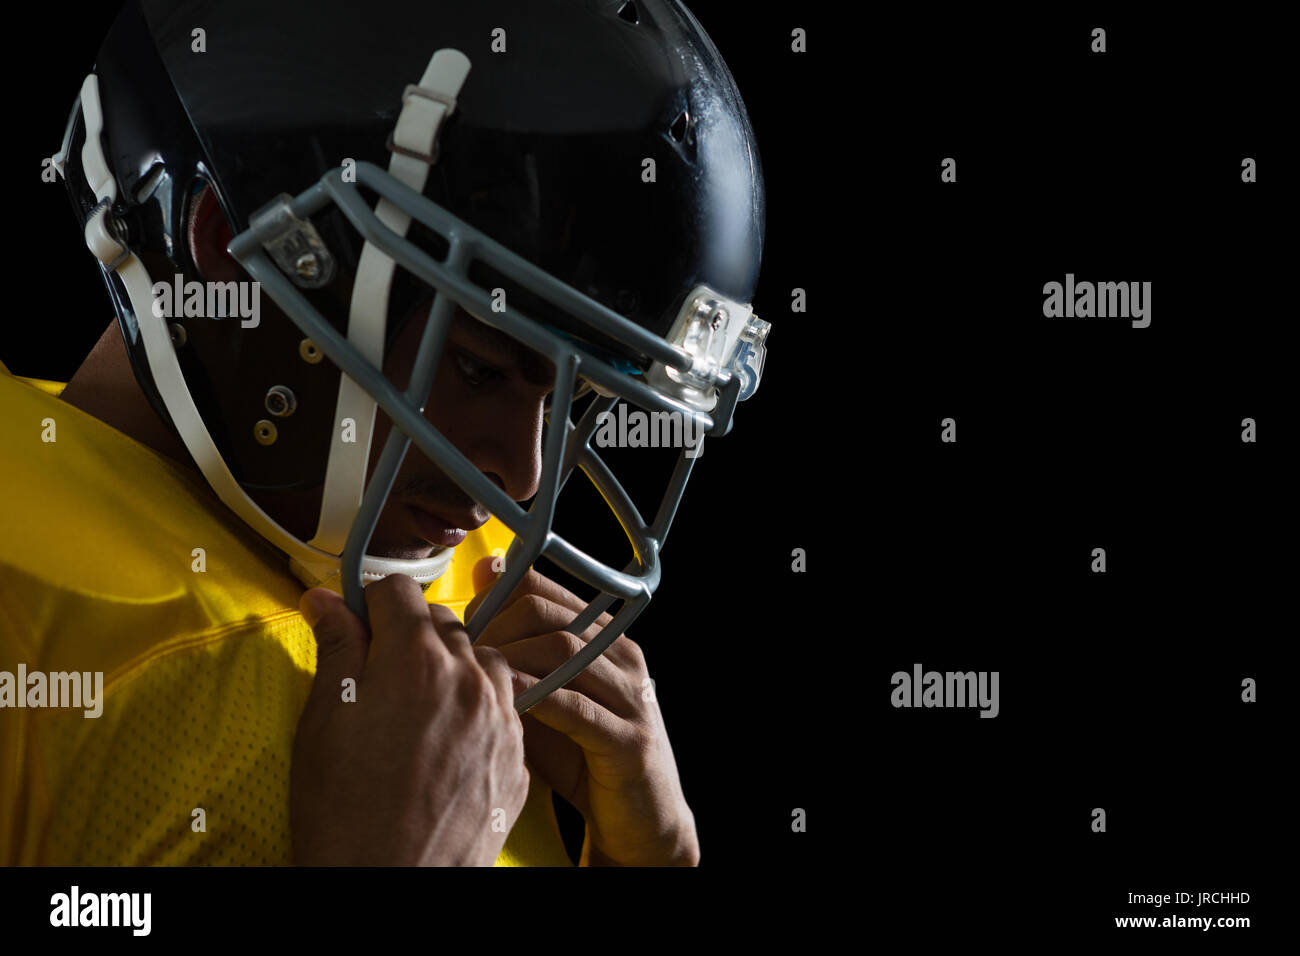 Football player head images